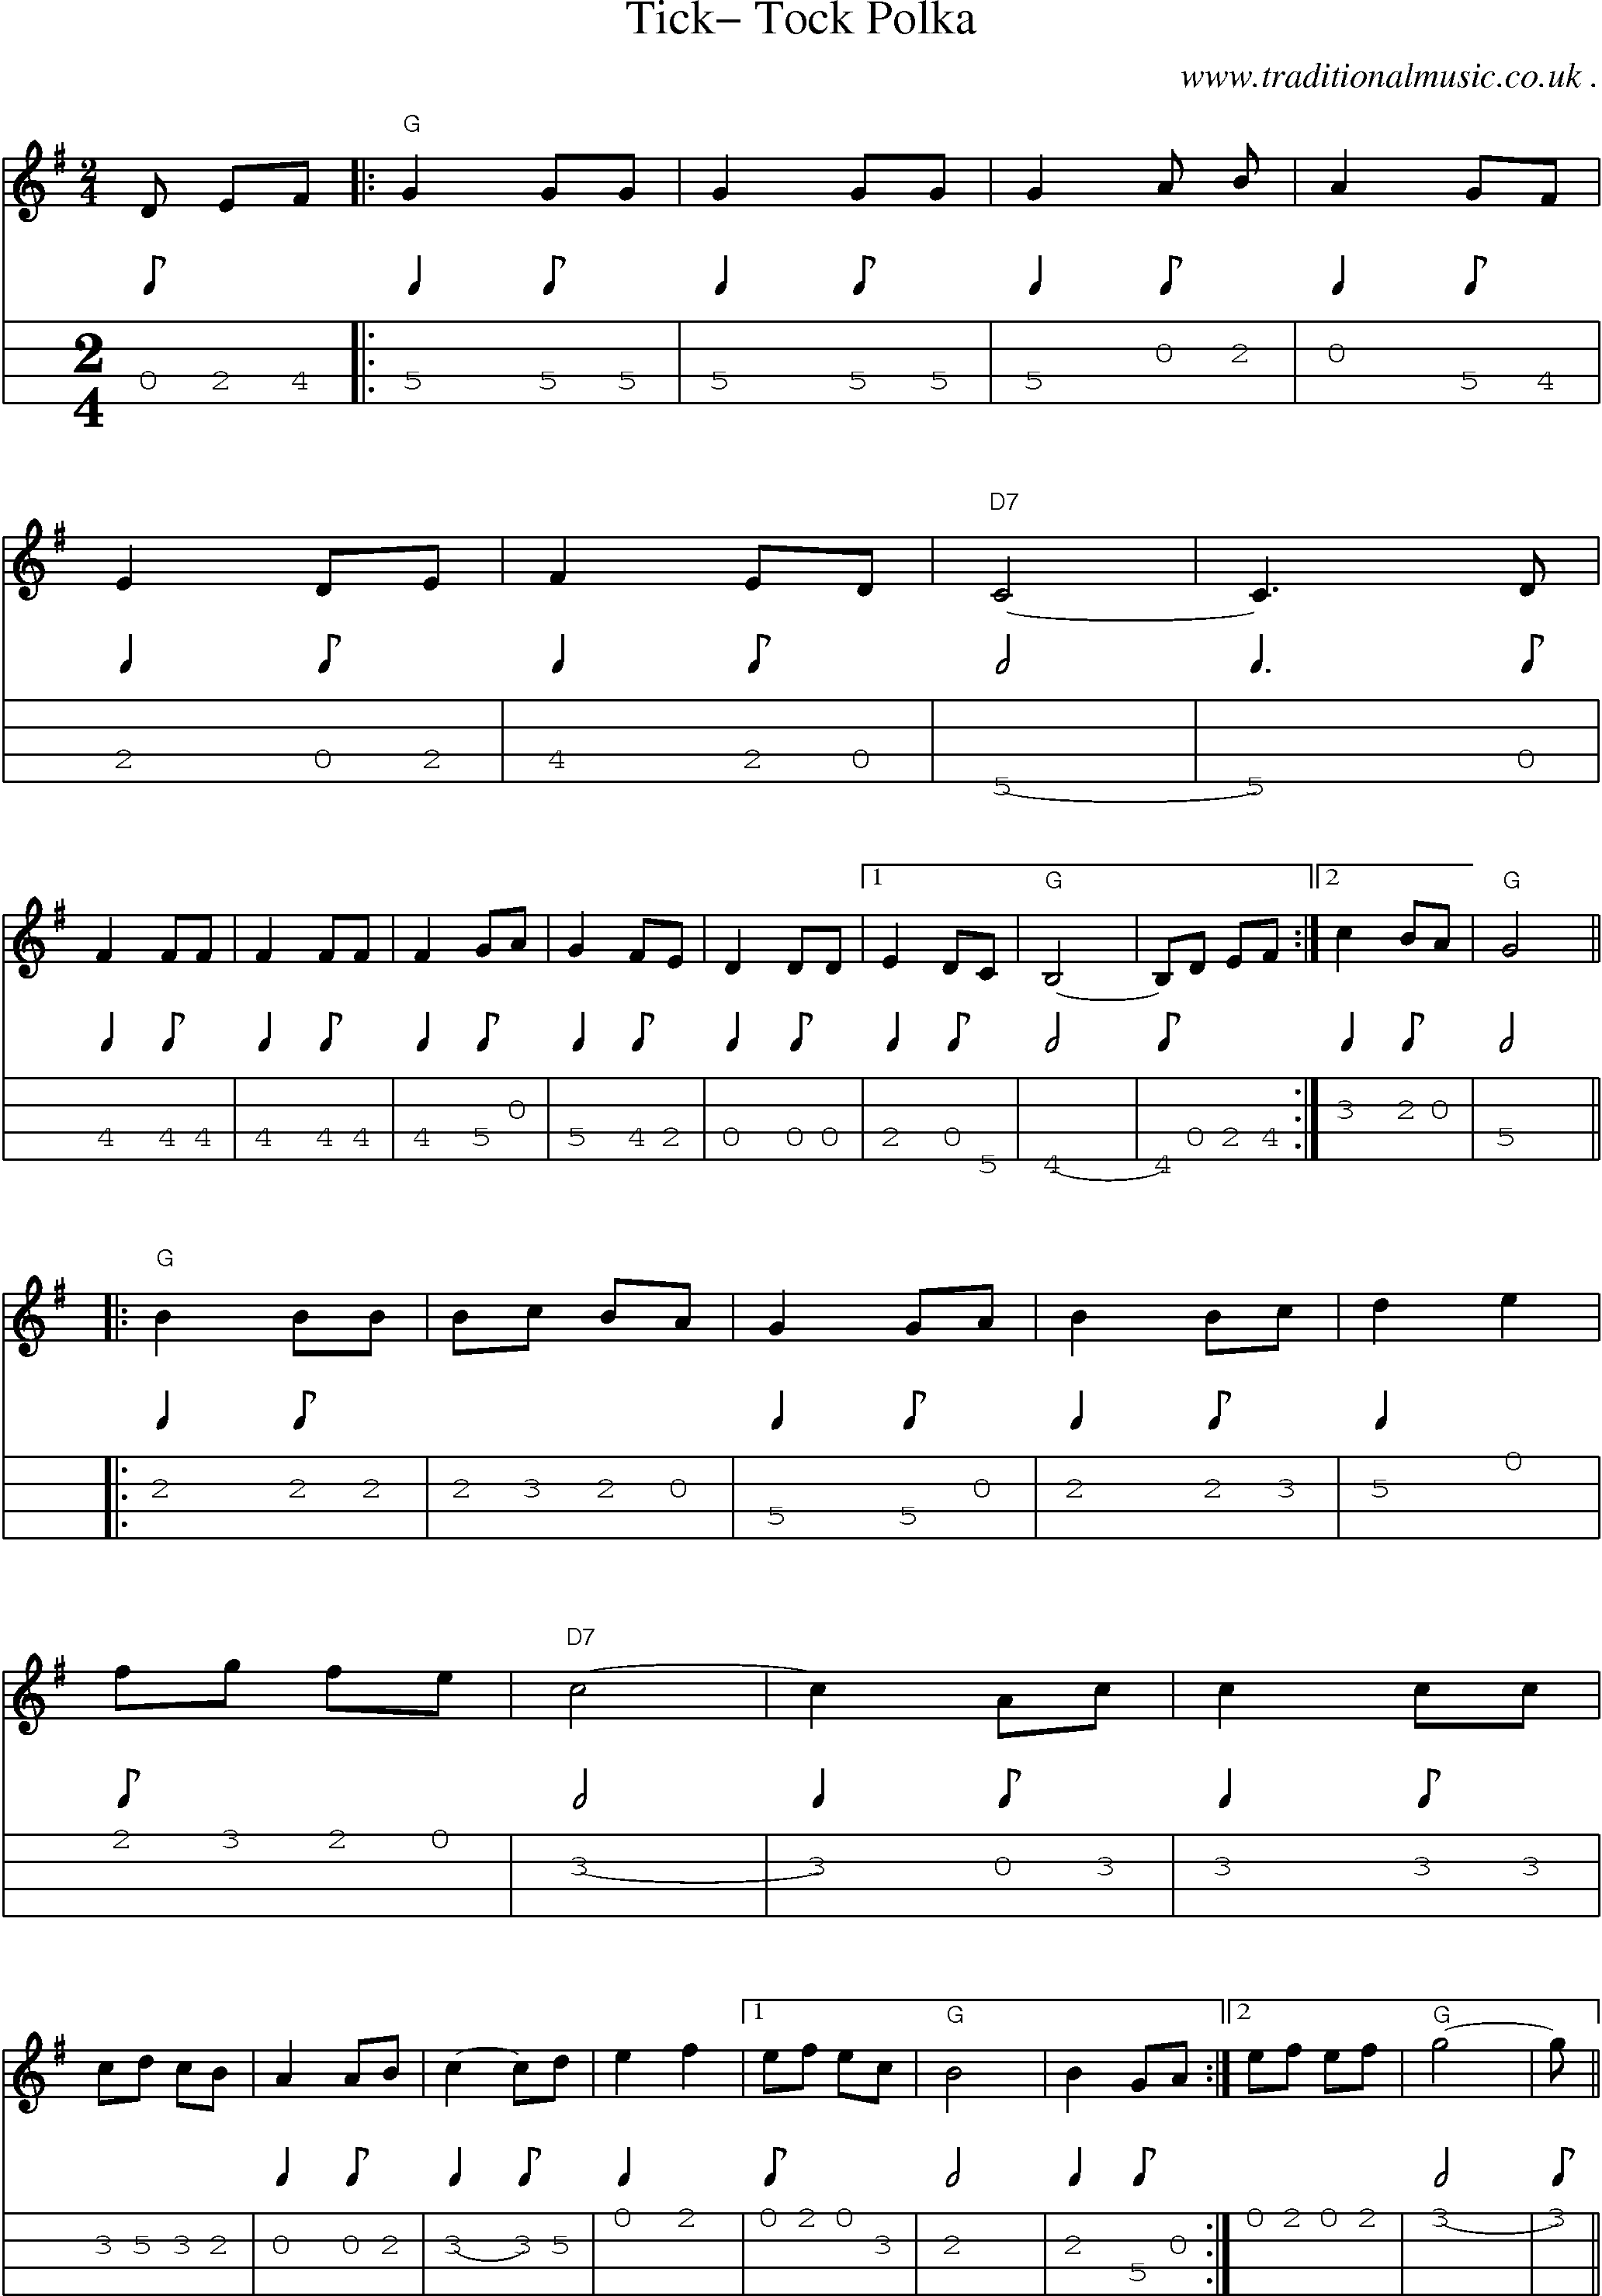 Music Score and Guitar Tabs for Tick- Tock Polka